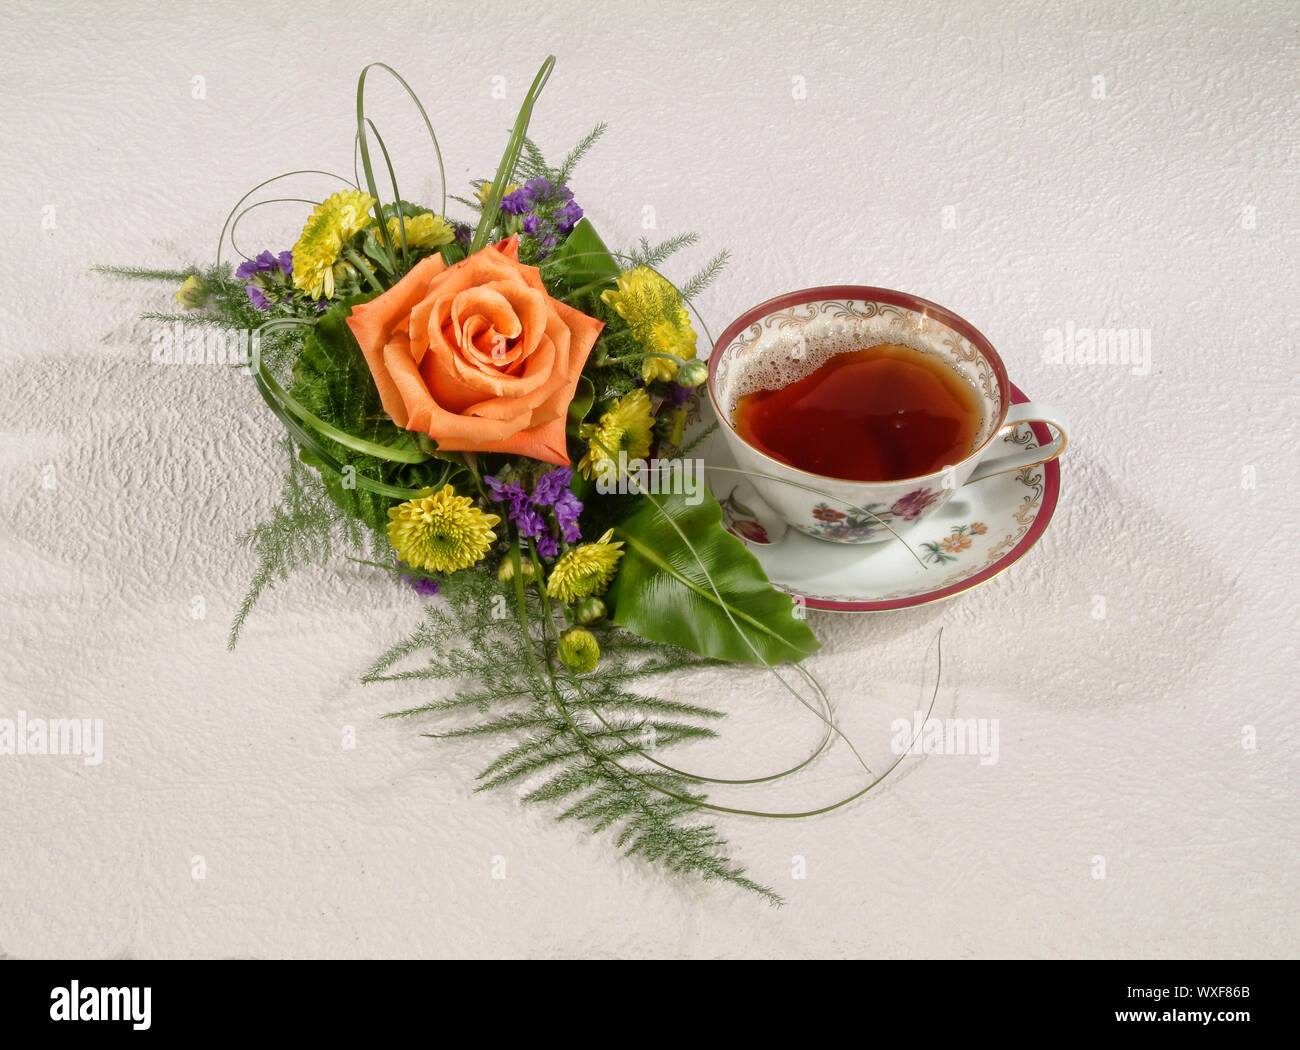 Still Life With Flowers Stock Photo